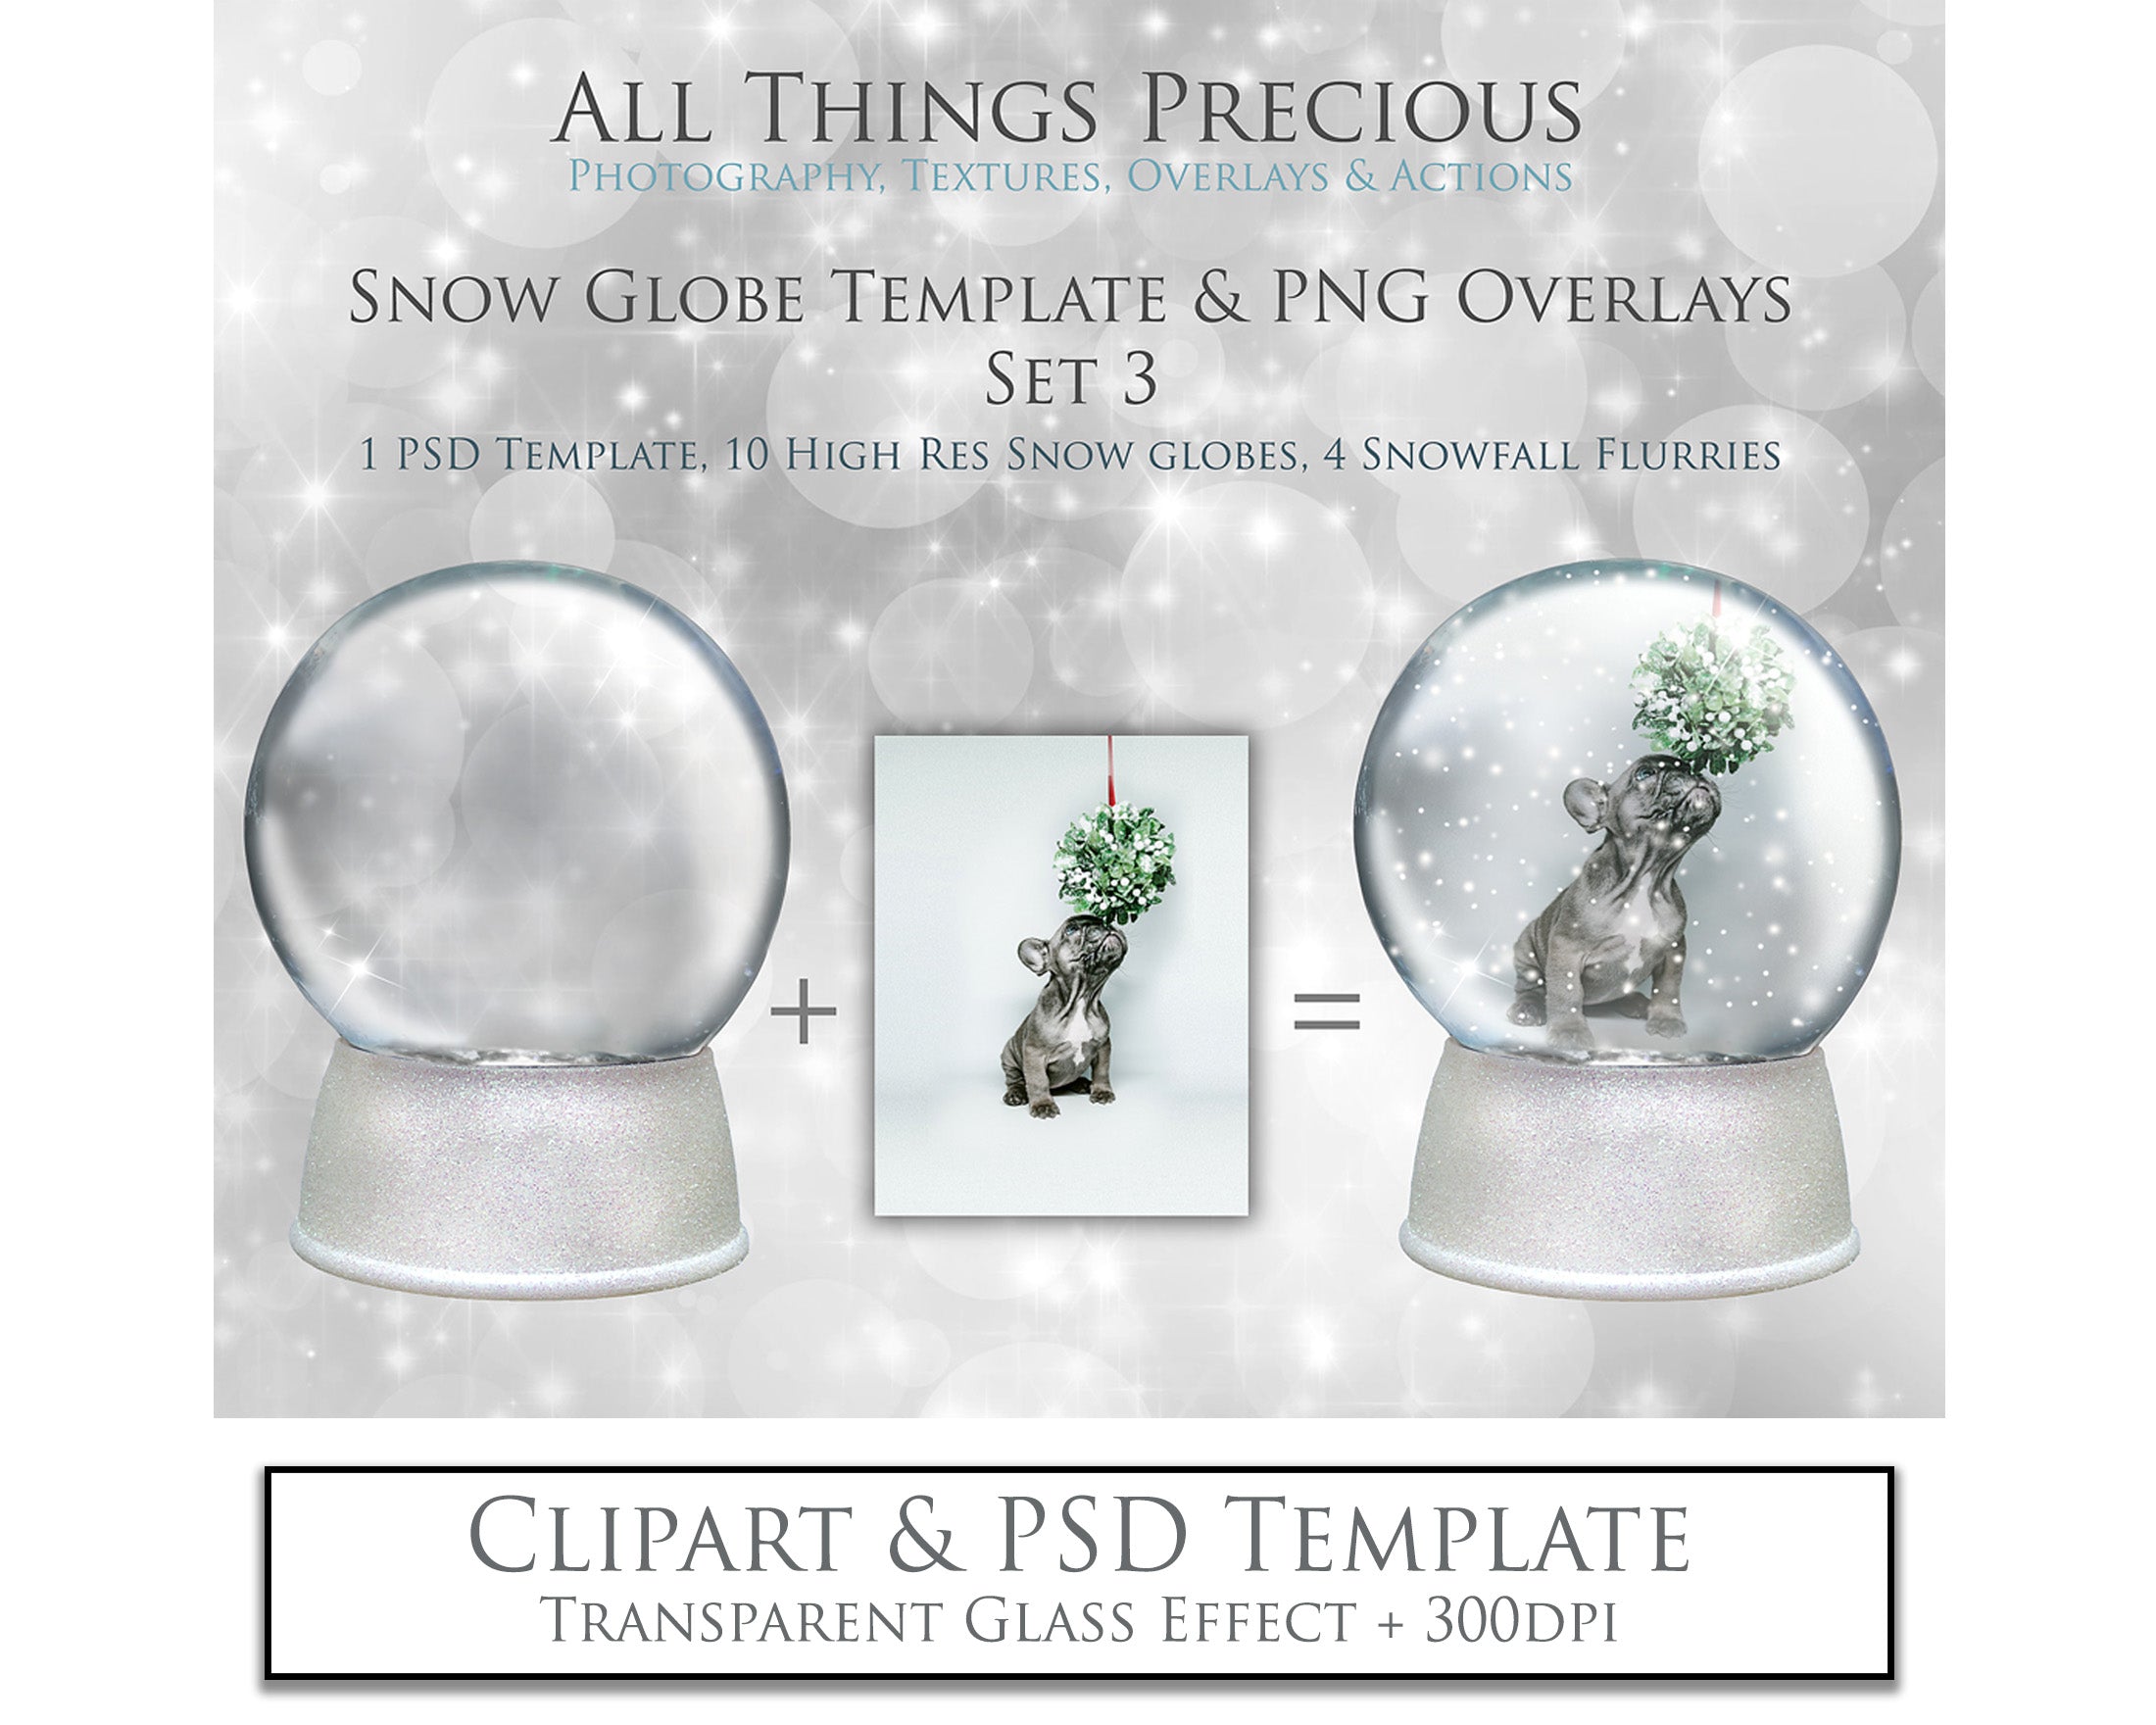 Digital Snow Globe Clipart and Background with snow Overlays and a PSD Template included in the set.The globe is transparent, perfect for you to add your own images and retain the snow globe effect. Photoshop Photography Background. Printable, Editable for Christmas with Santa Window or Glass Globe. ATP Textures 